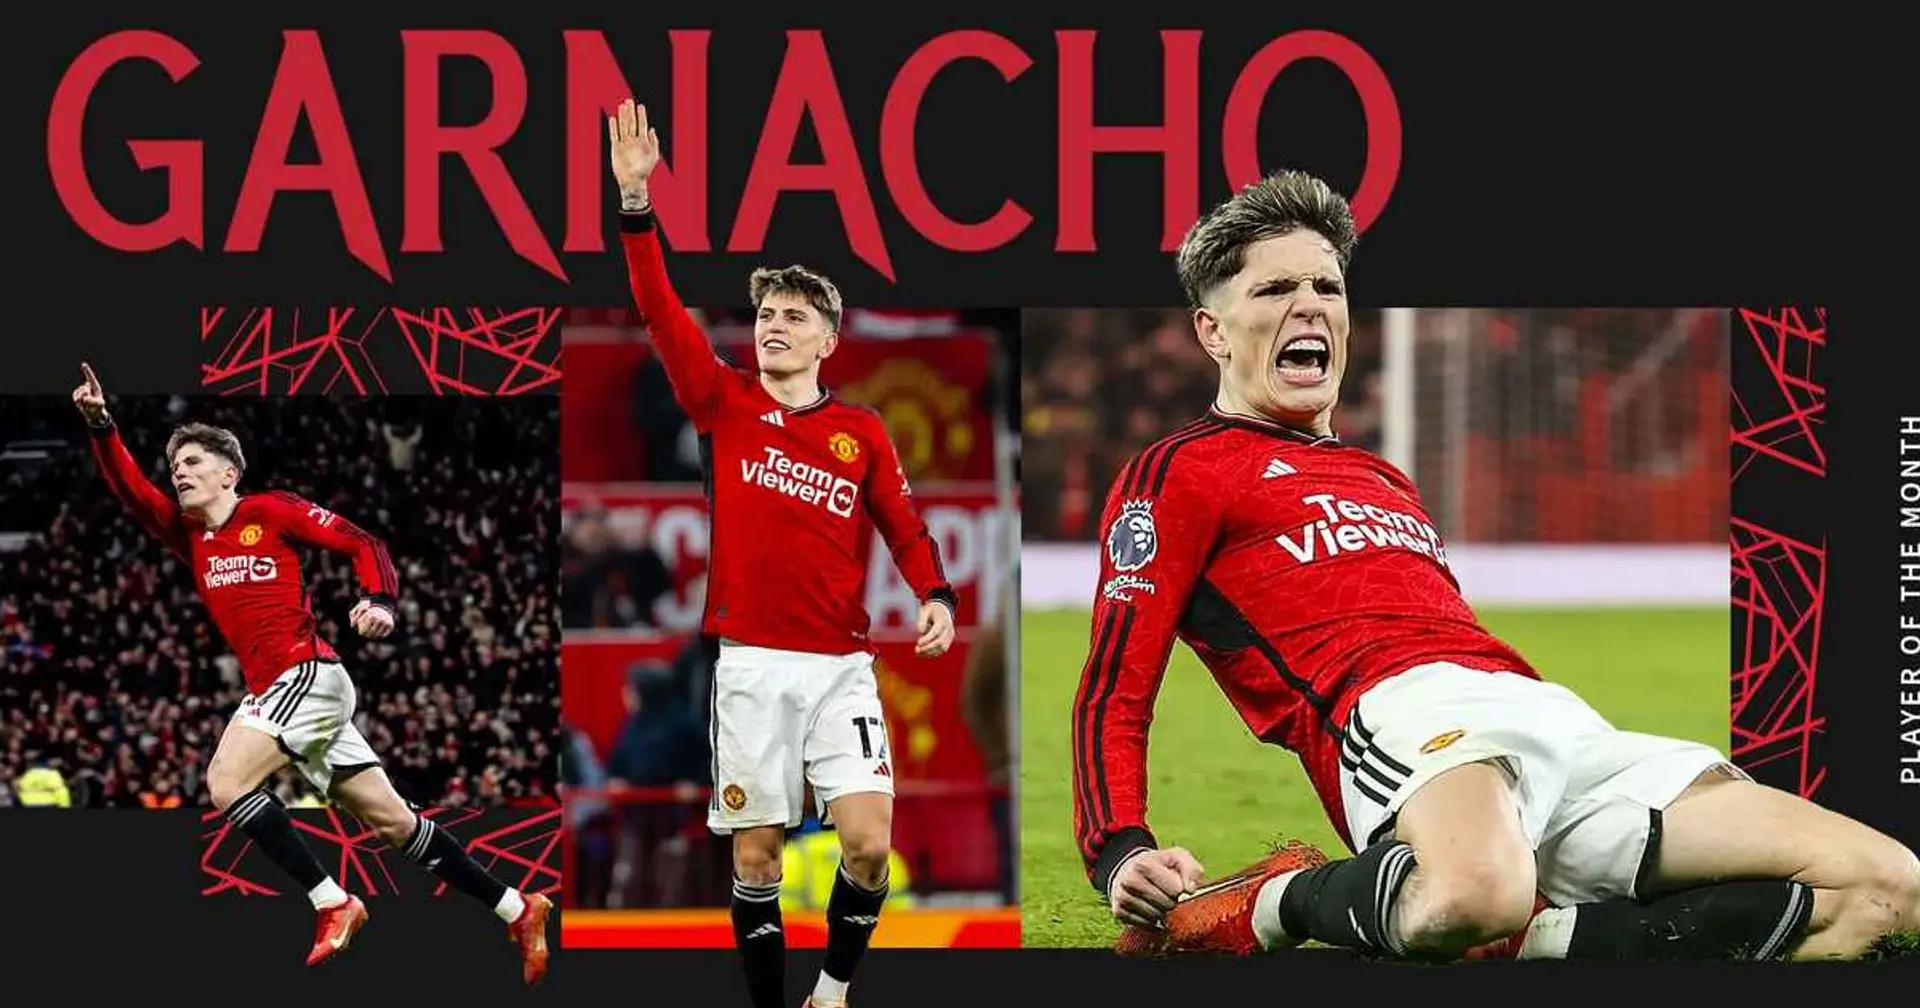 Garnacho named Player of the Month & 2 other under-radar Man United stories today